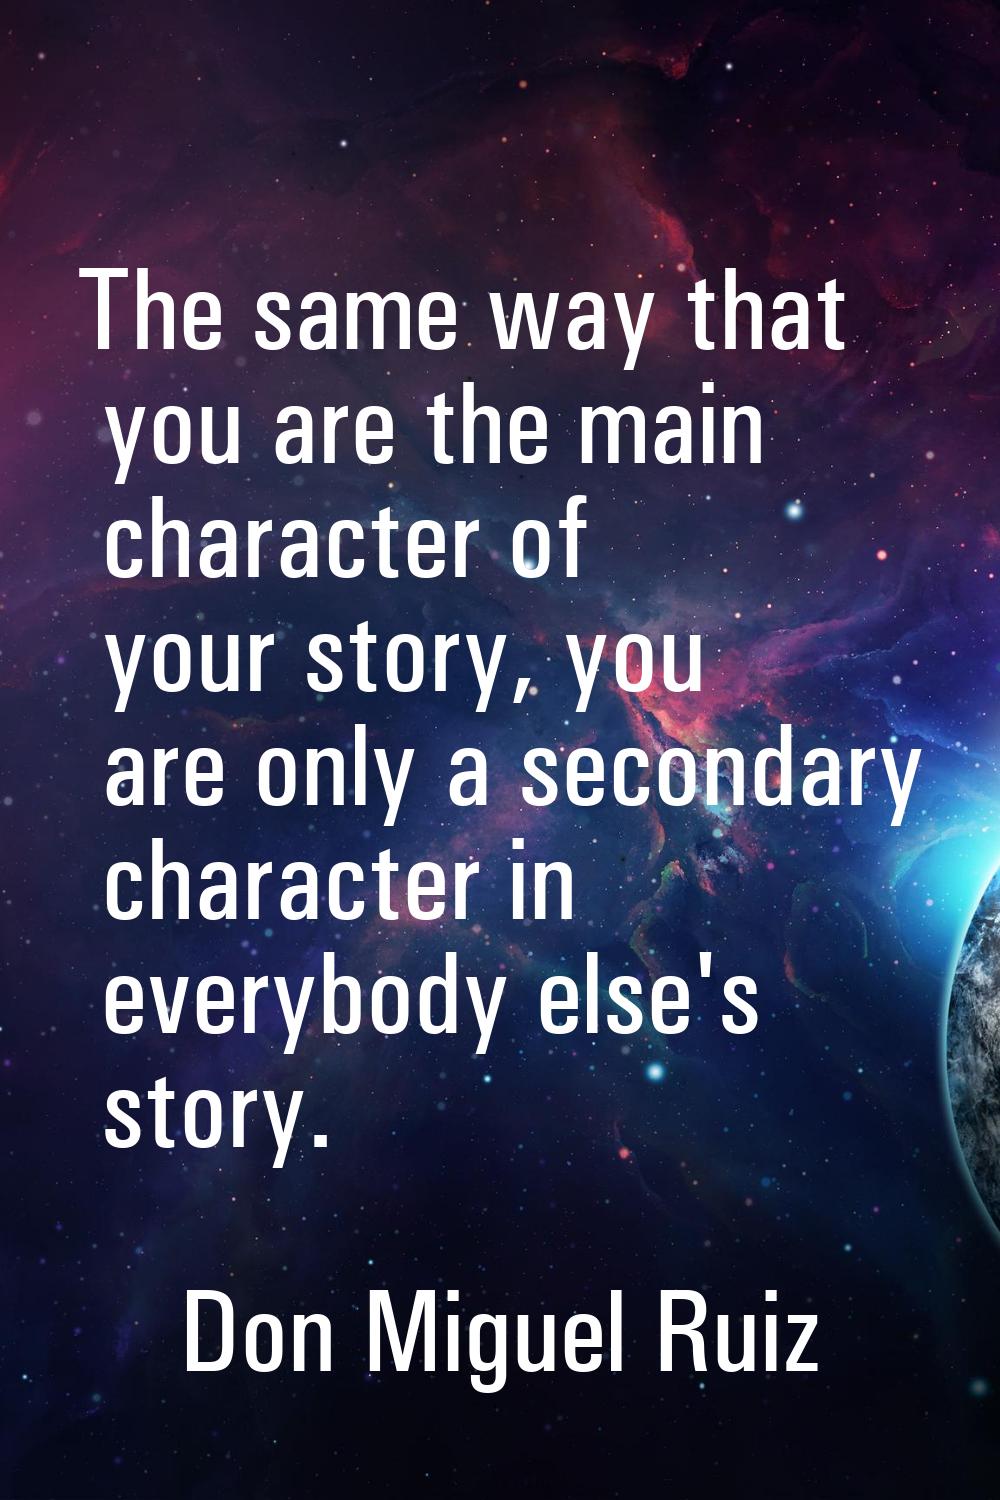 The same way that you are the main character of your story, you are only a secondary character in e